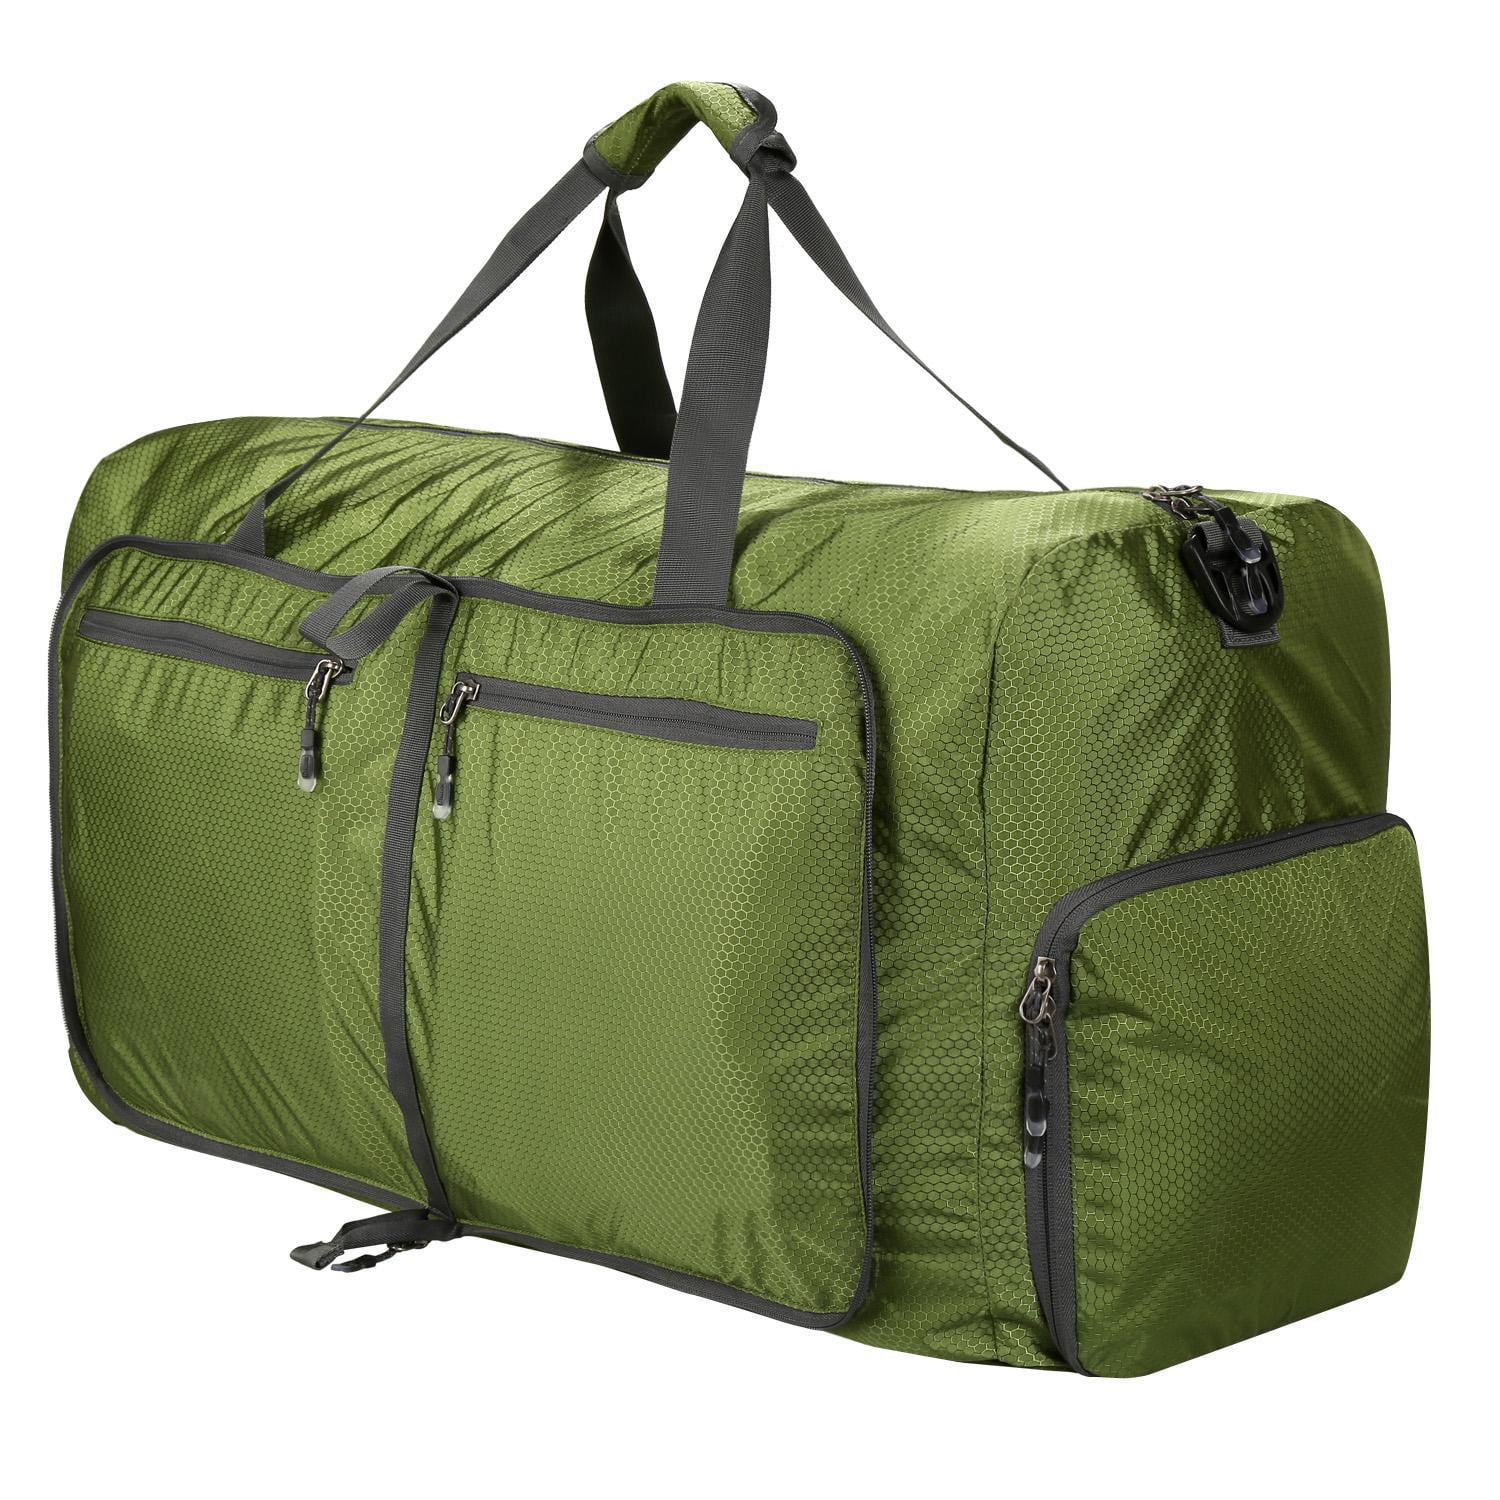 Coreal 80L Foldable Travel Camping Duffel Luggage Bag with Shoe Compartment 